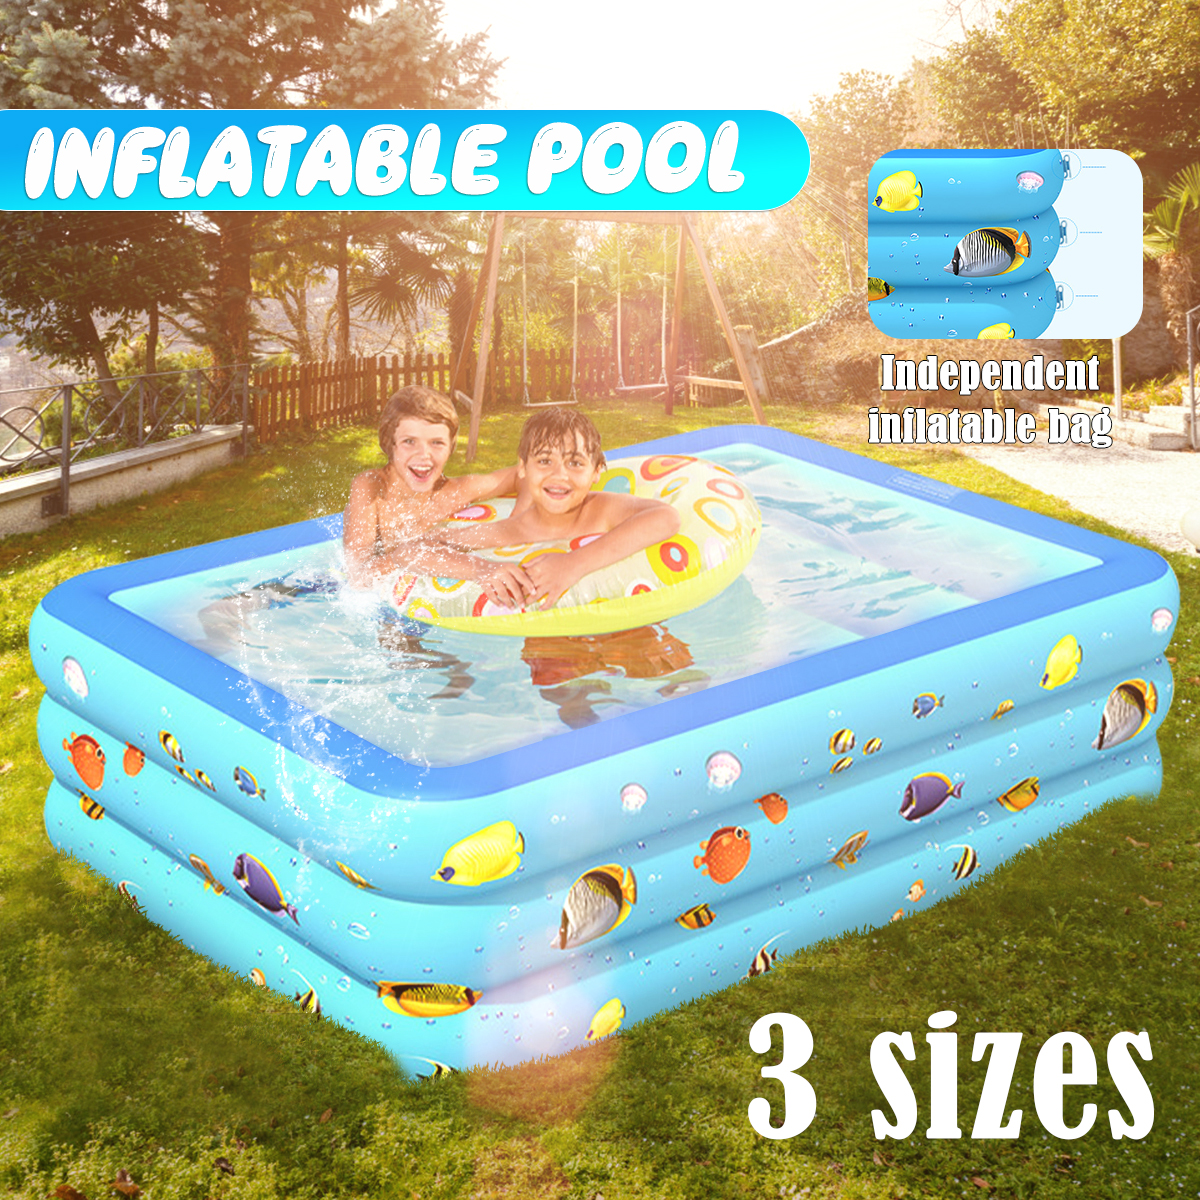 Inflatable-Swimming-Pool-Yard-Garden-Family-Kids-Play-Backyard-Blow-Up-Paddling-Pool-Bathing-Tub-Out-1689353-1